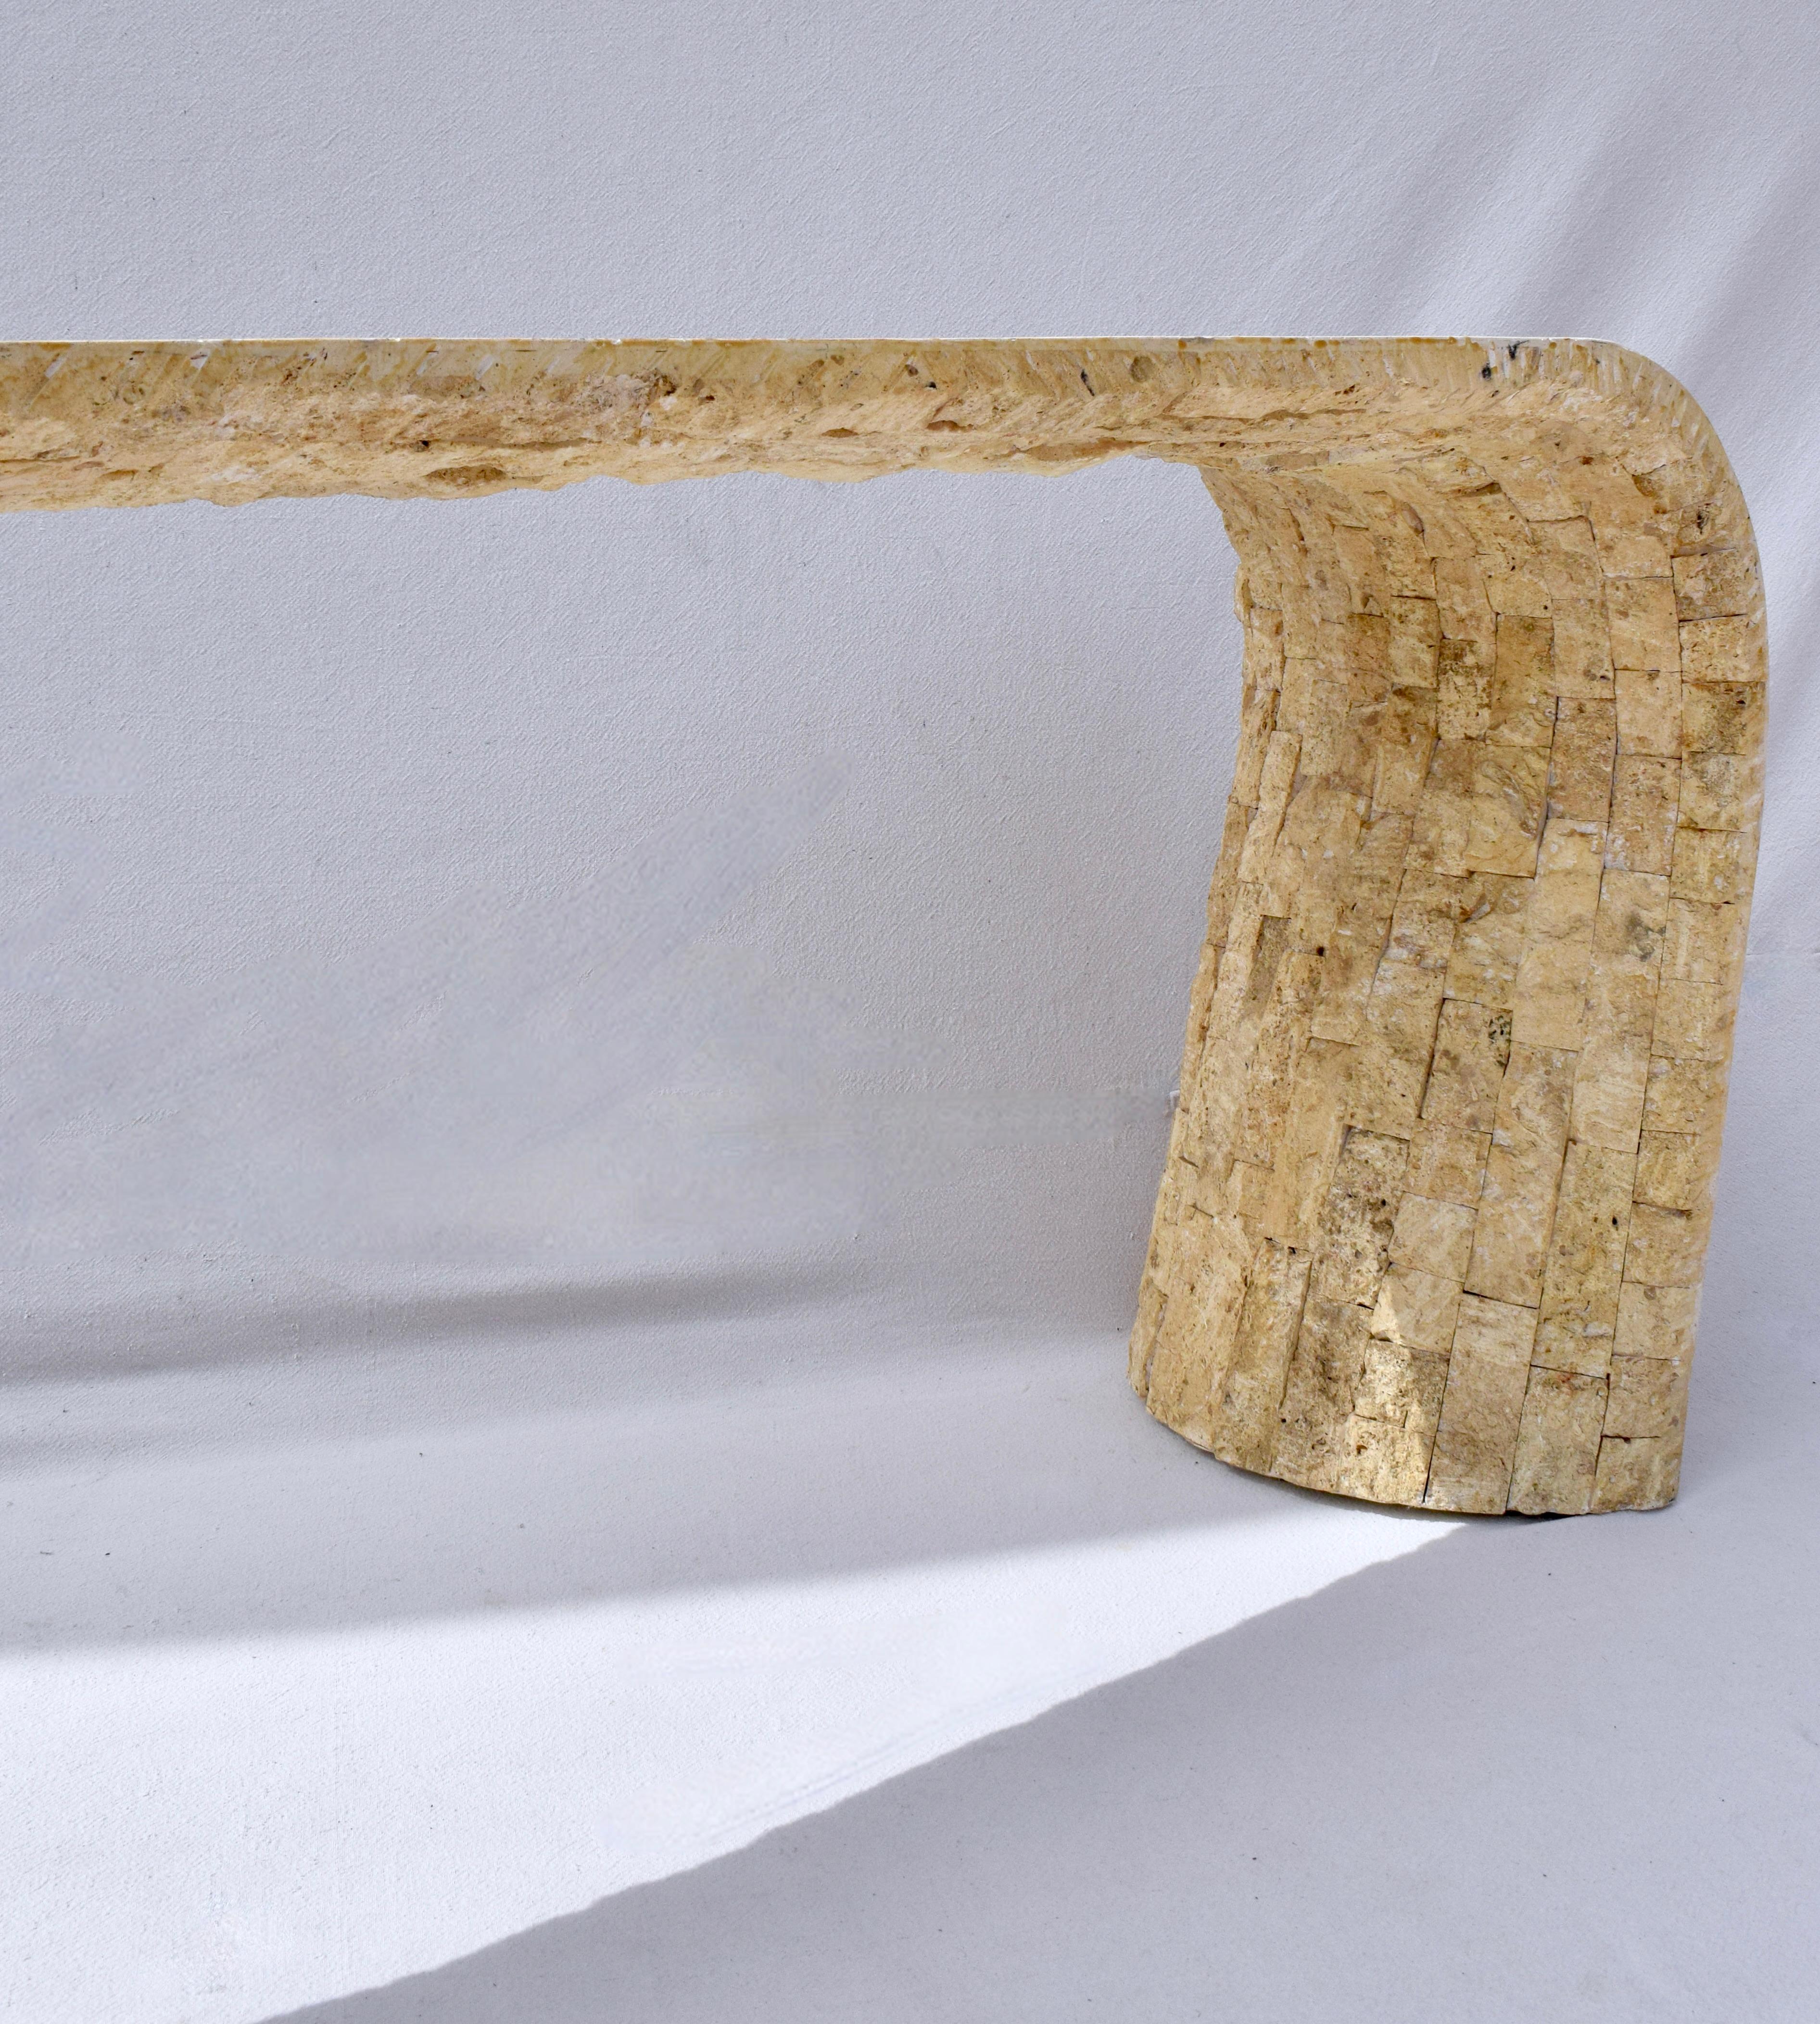 Striking Mediterranean style tessellated stone console table, circa 1970s constructed of fossilized design of both rough-hewn and smooth surfaces. Our photo shoot took place during the 2024 solar eclipse. The changing light at the time perfectly